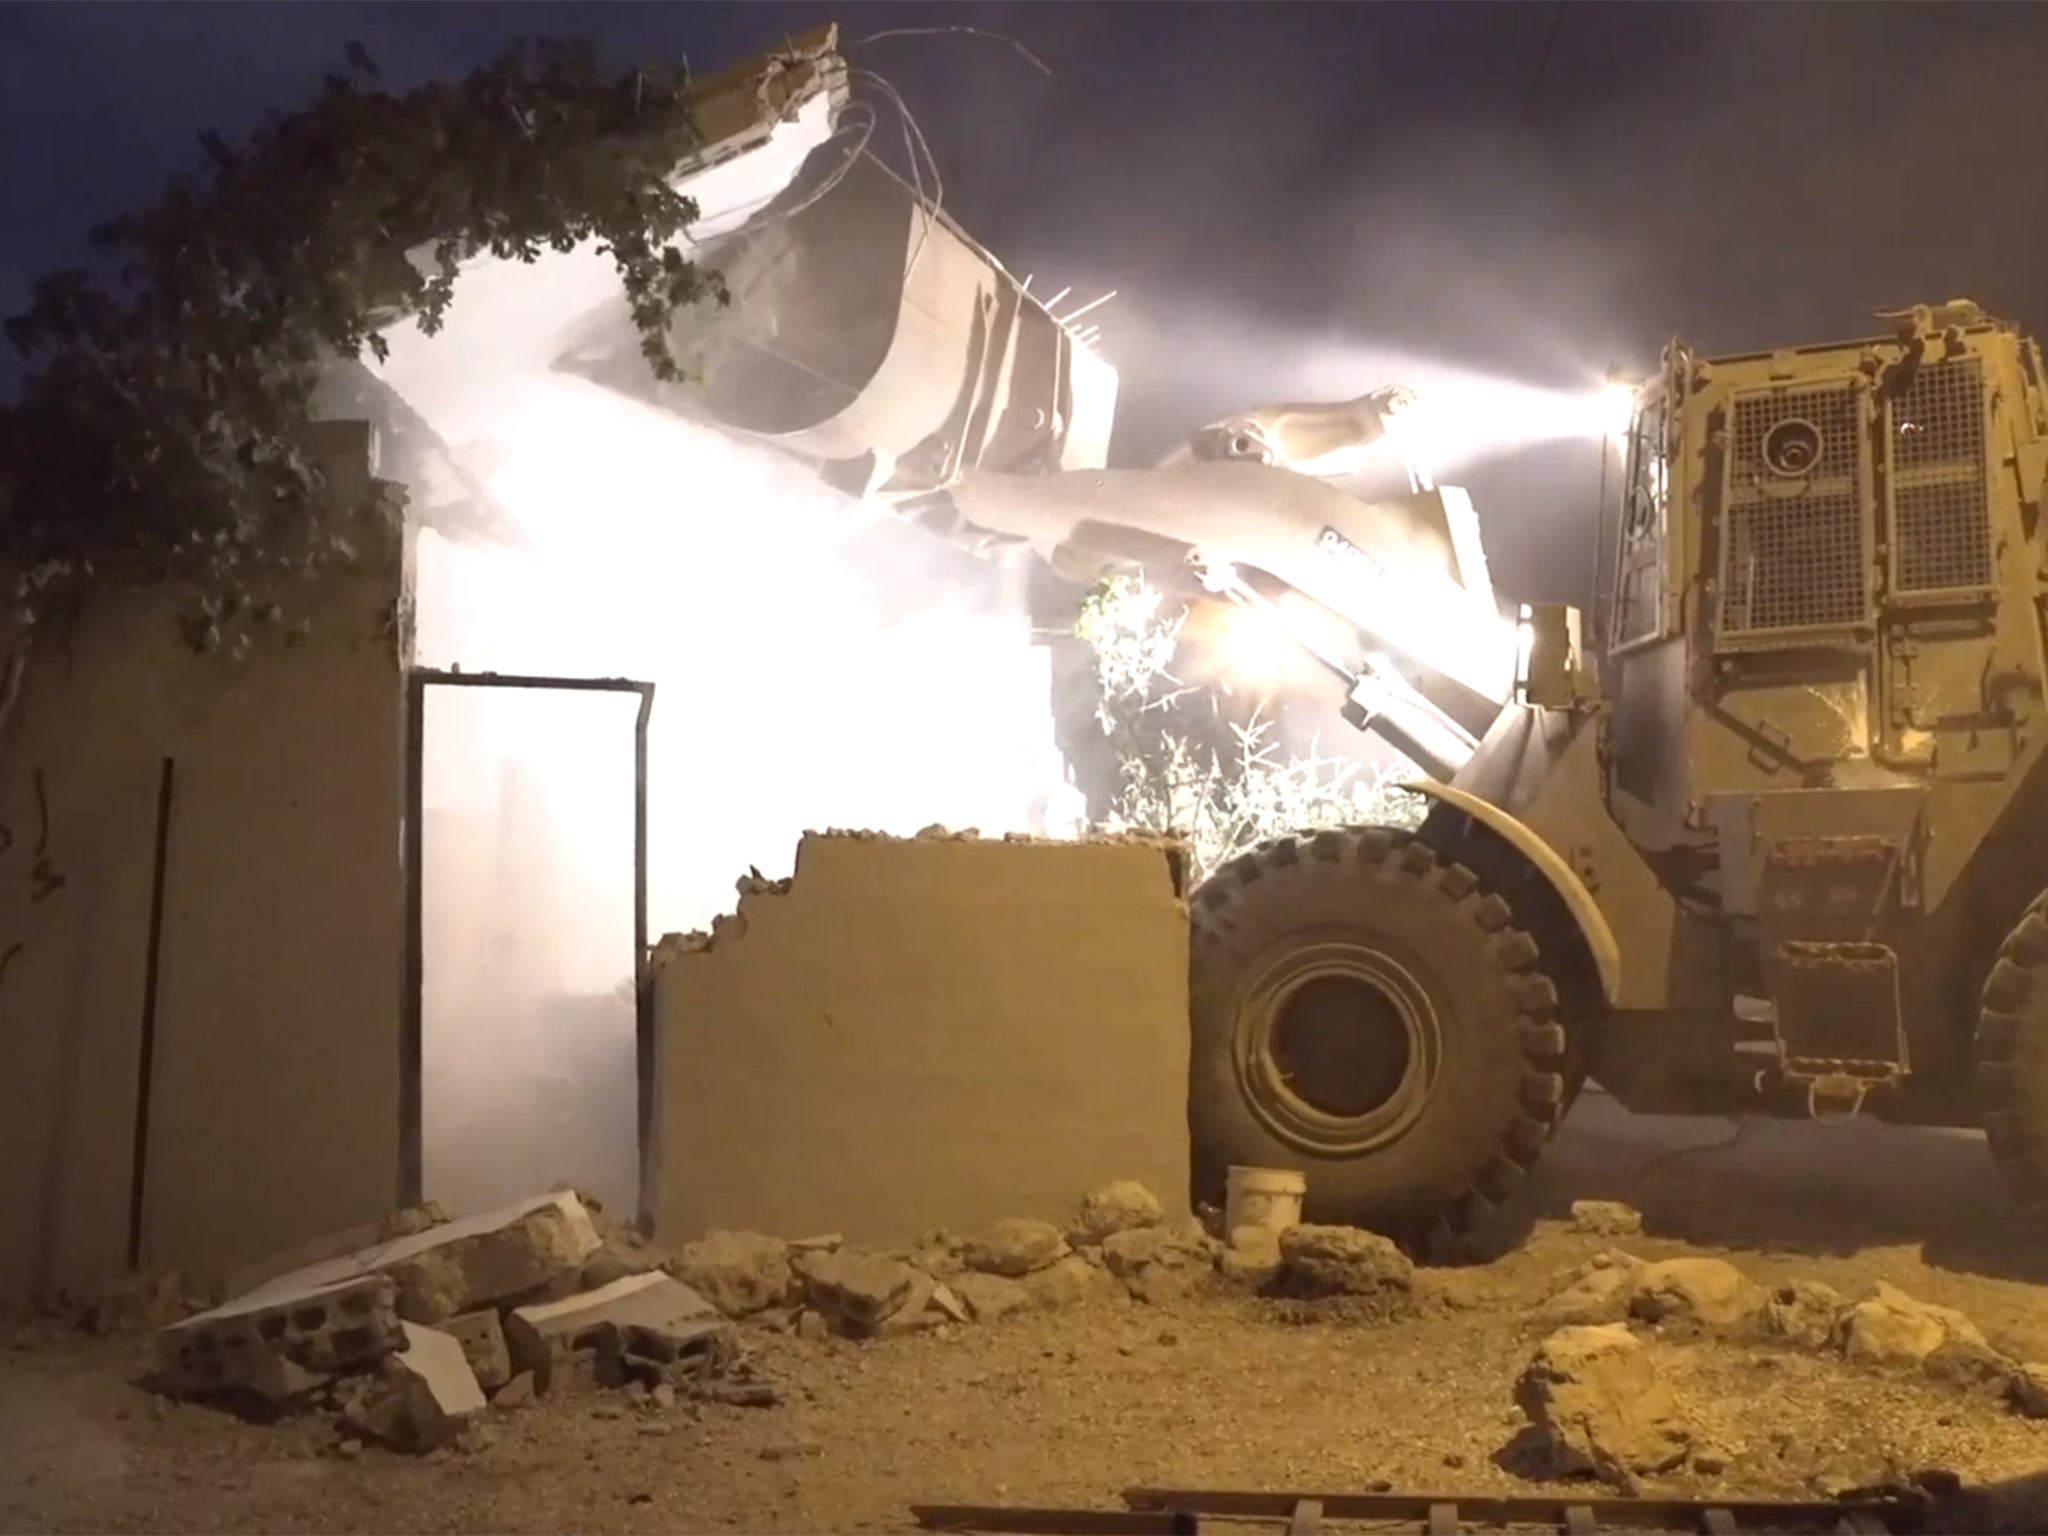 An Israeli bulldozer destroys the West Bank home of a Palestinian who stabbed to death an Israeli citizen Image: Israeli army